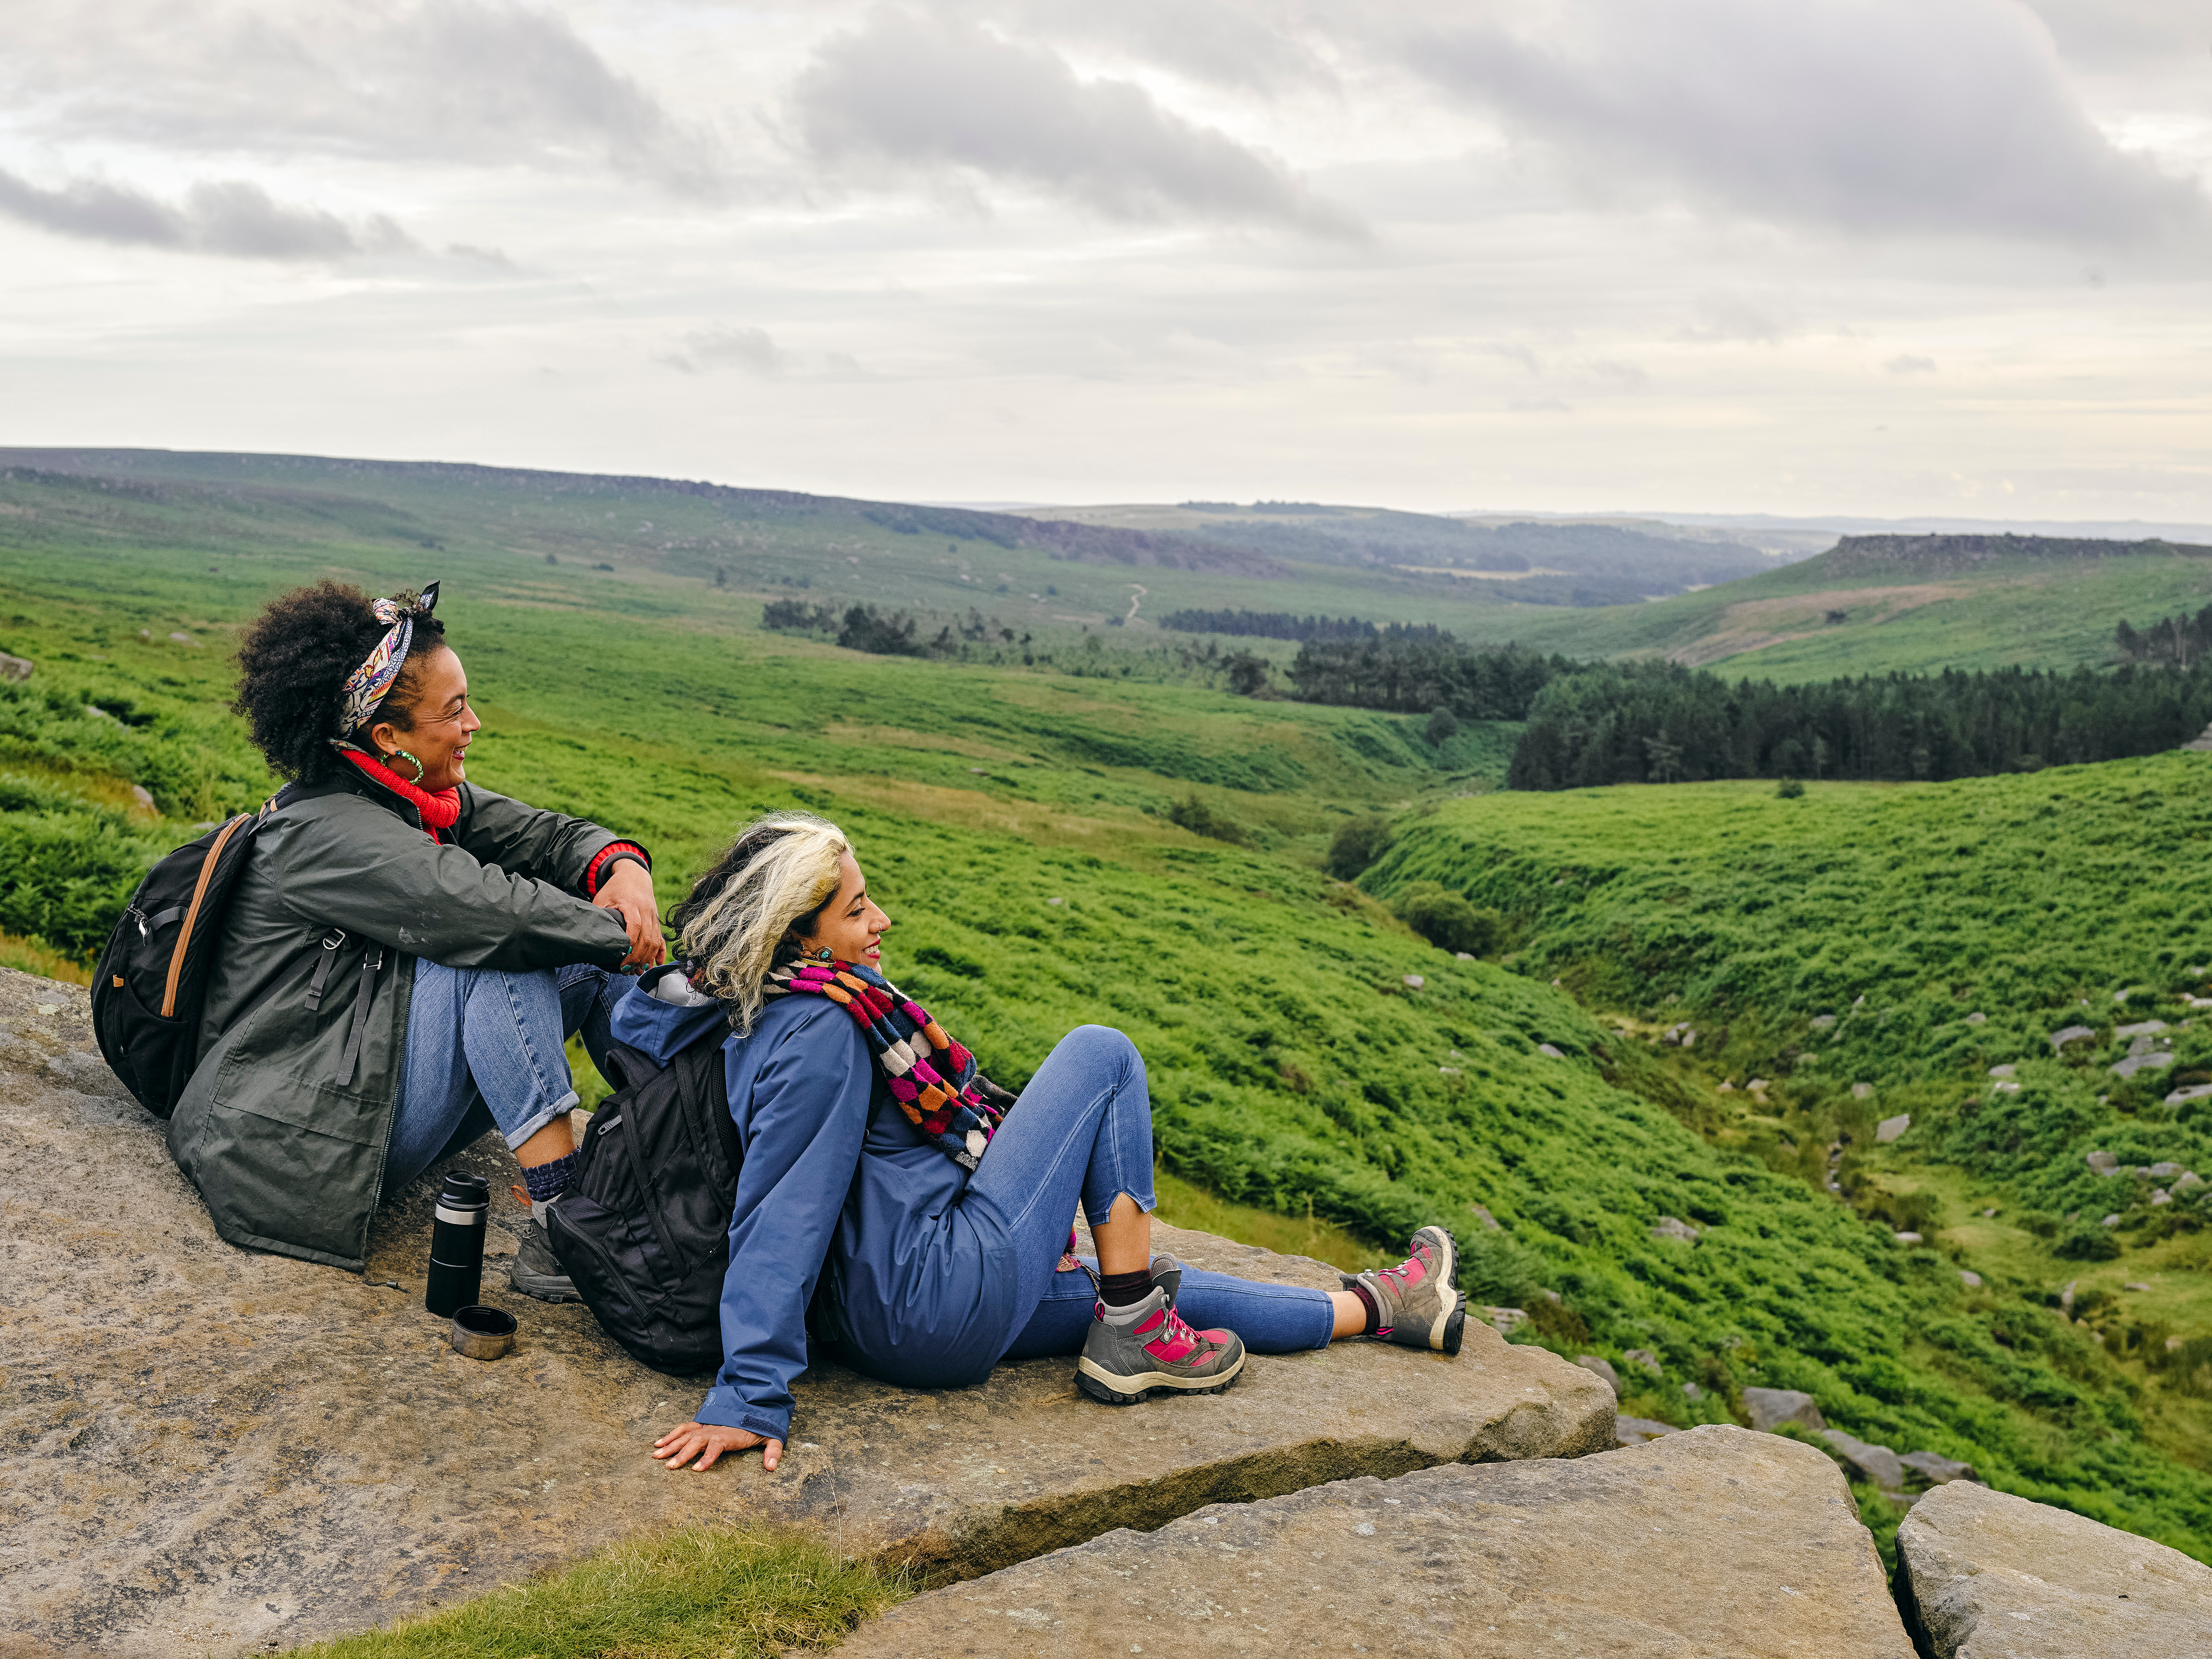 two women sit and look at a view on a hike